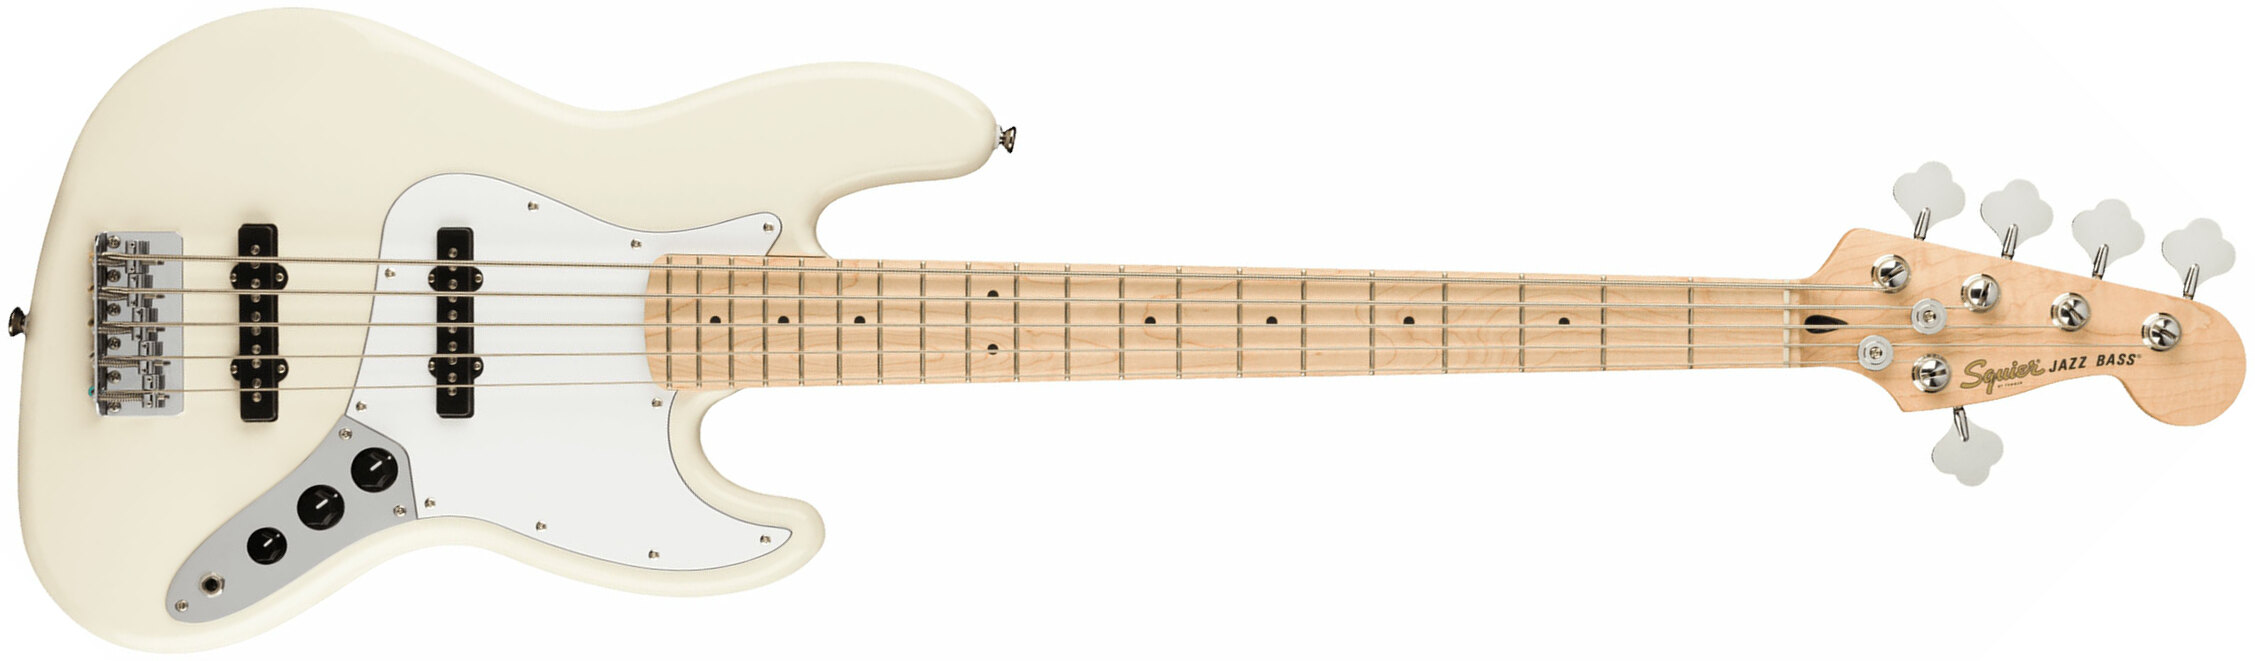 Squier Jazz Bass Affinity V 2021 5-cordes Mn - Olympic White - Bajo eléctrico de cuerpo sólido - Main picture